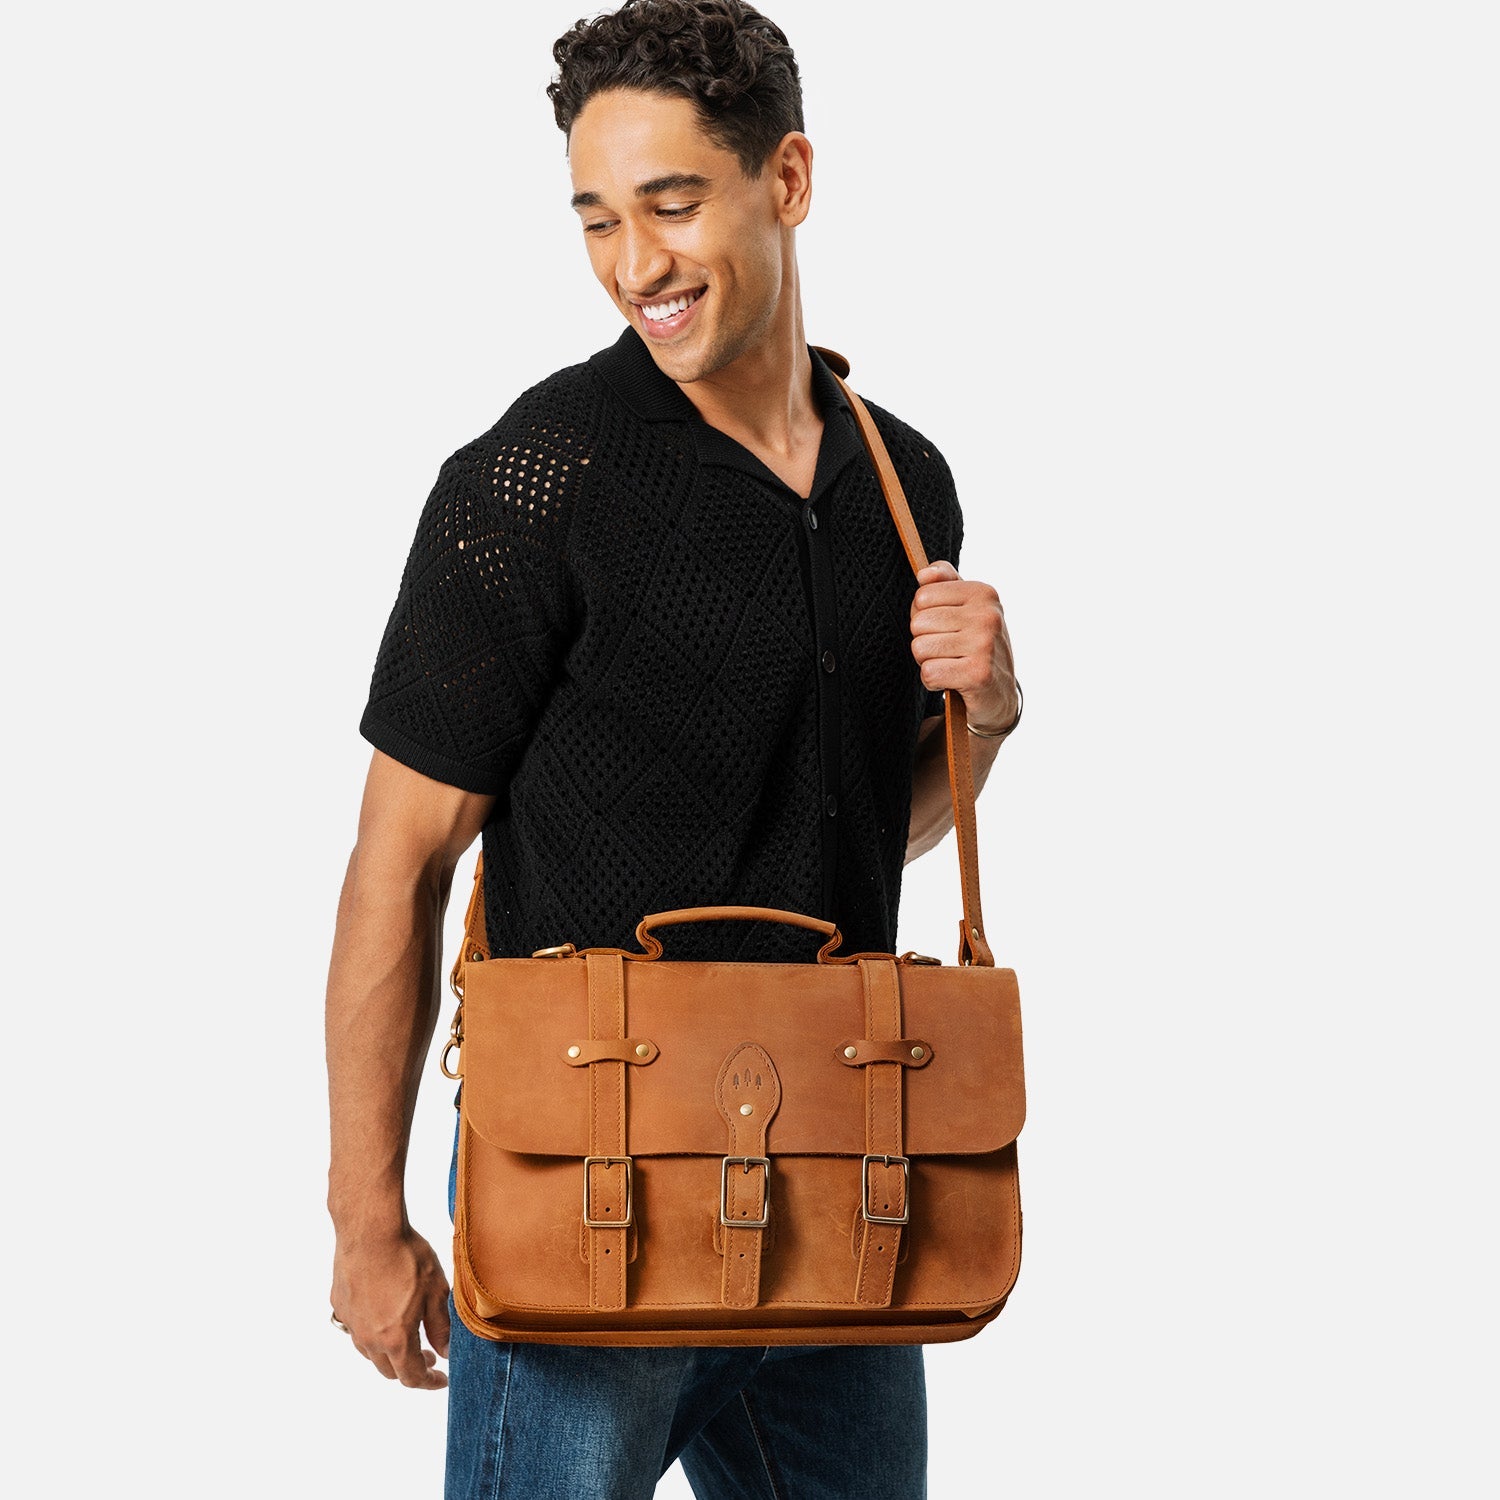 Buy Personalized Laptop Messenger Bag - Promotional Wears